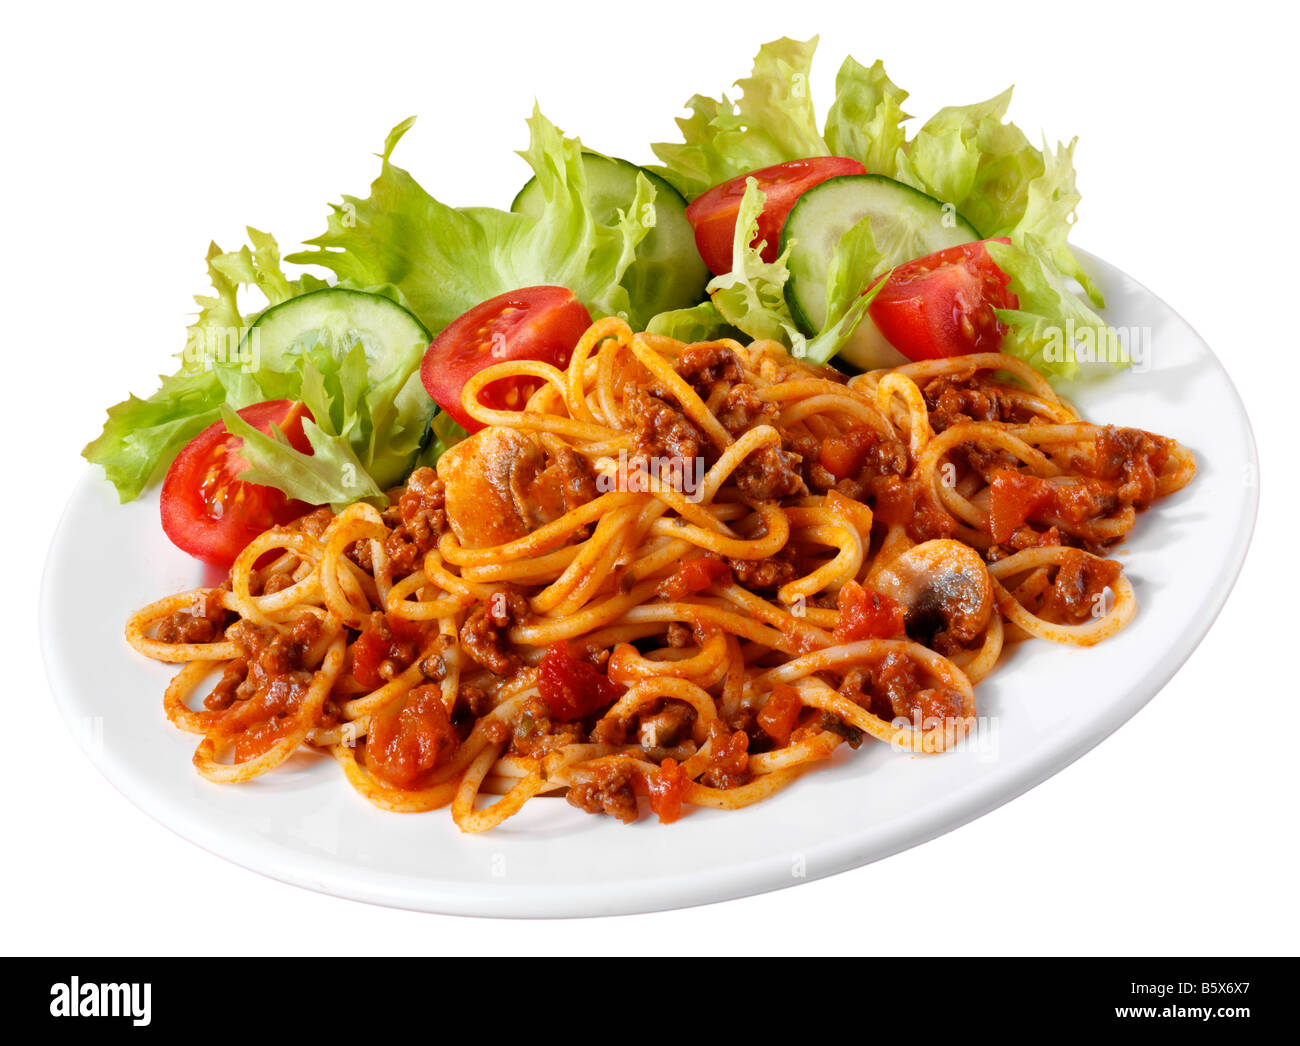 SPAGHETTI BOLOGNESE WITH SALAD Stock Photo